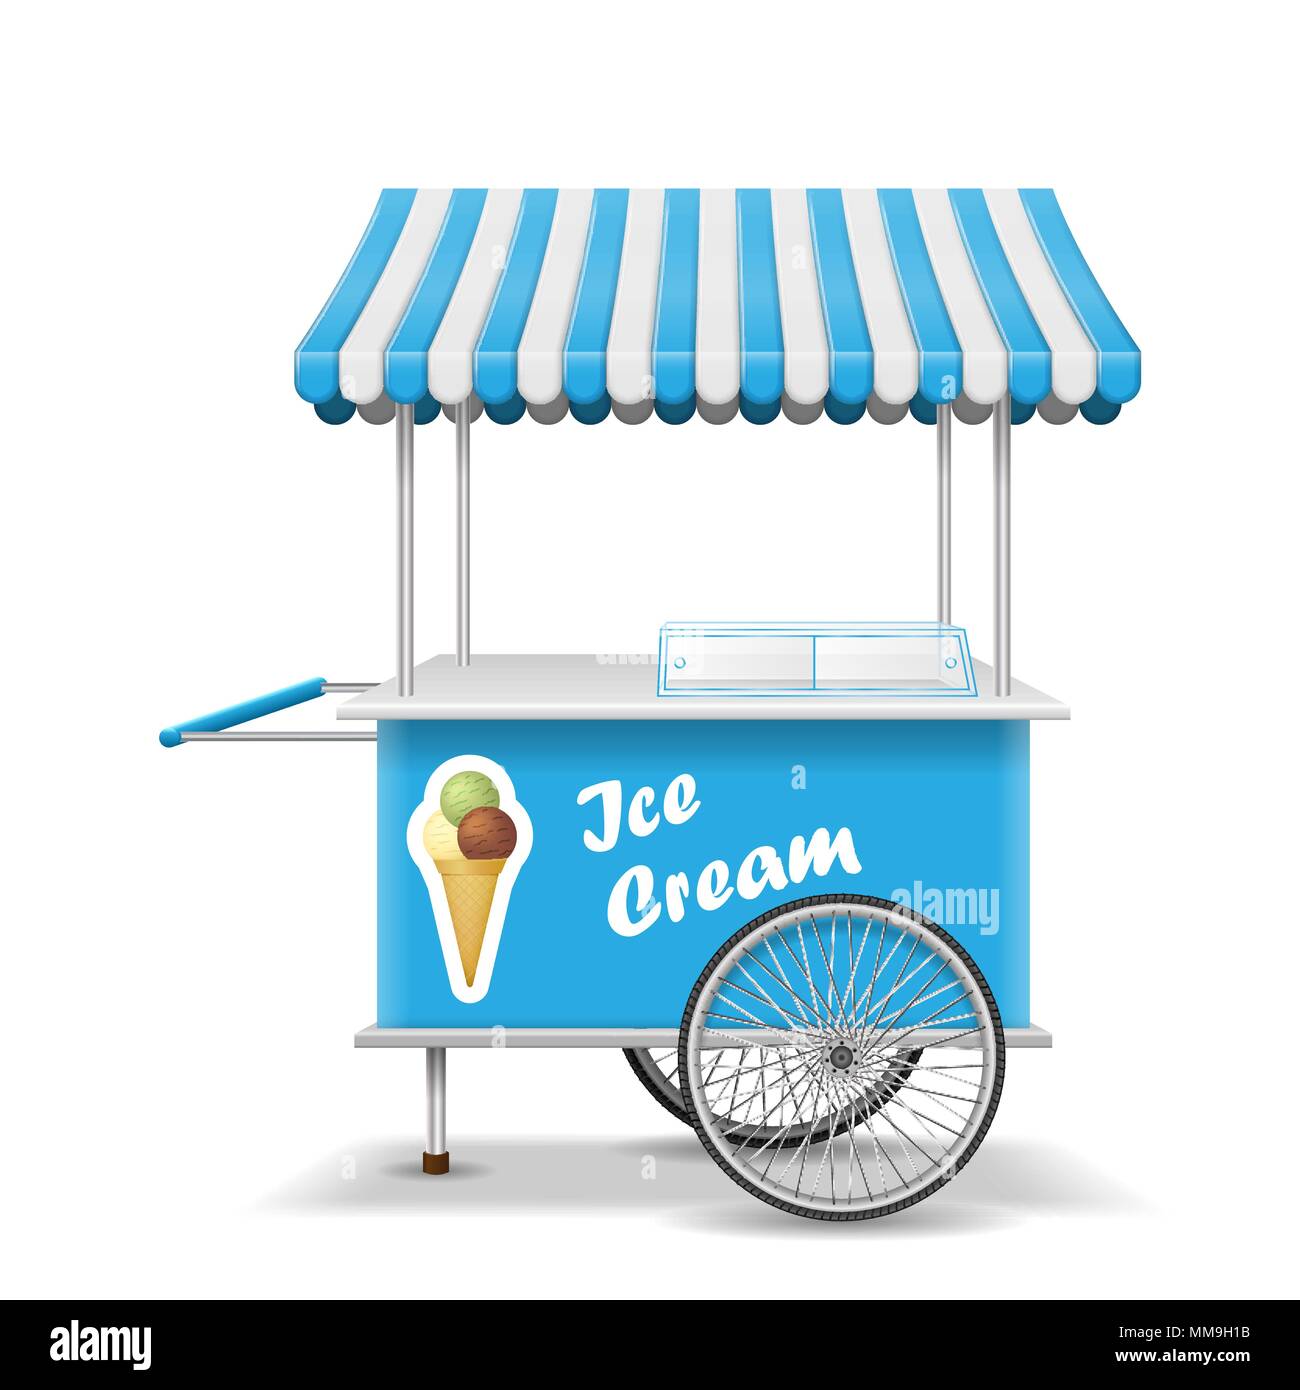 Realistic street food cart with wheels. Mobile blue ice cream market stall template. Ice cream market cart mockup. Vector illustration Stock Vector